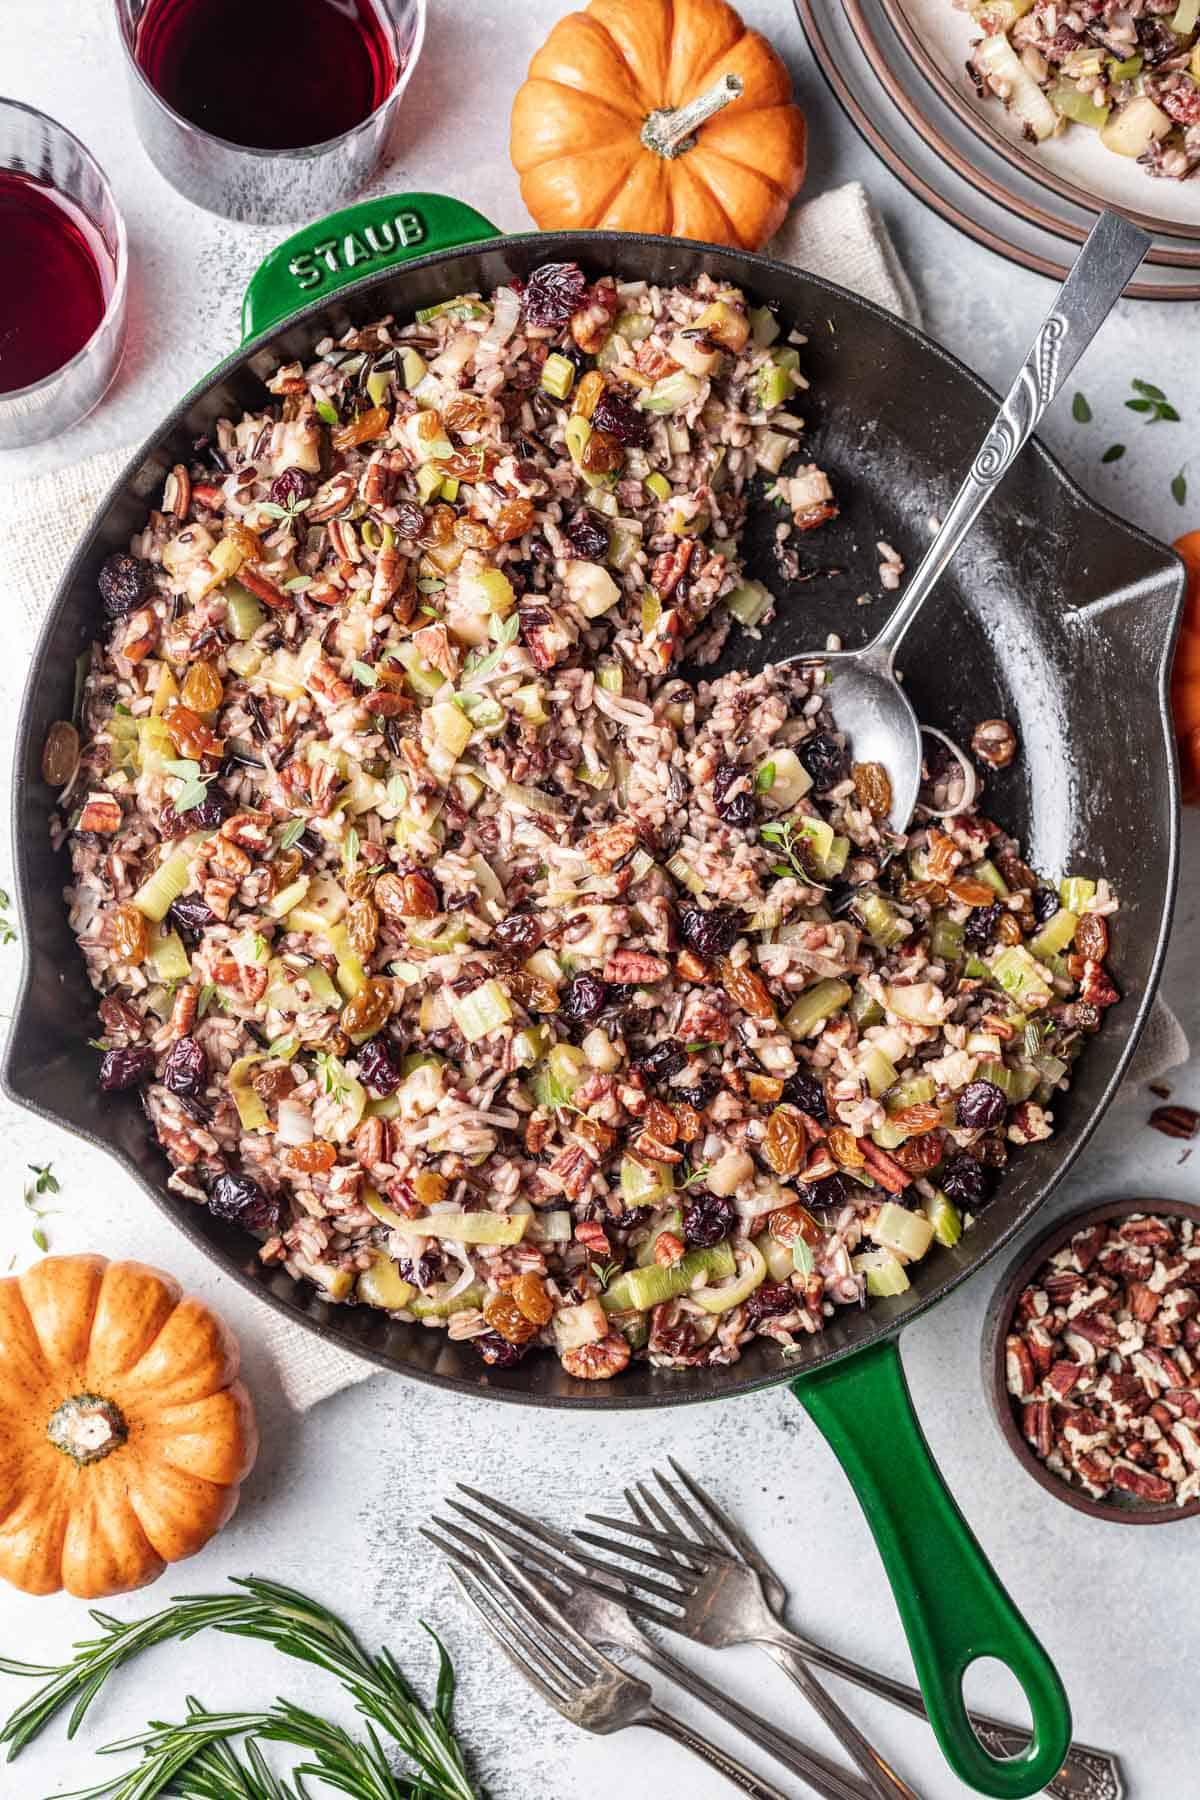 Wild rice for Thanksgiving in a green skillet with a serving spoon.